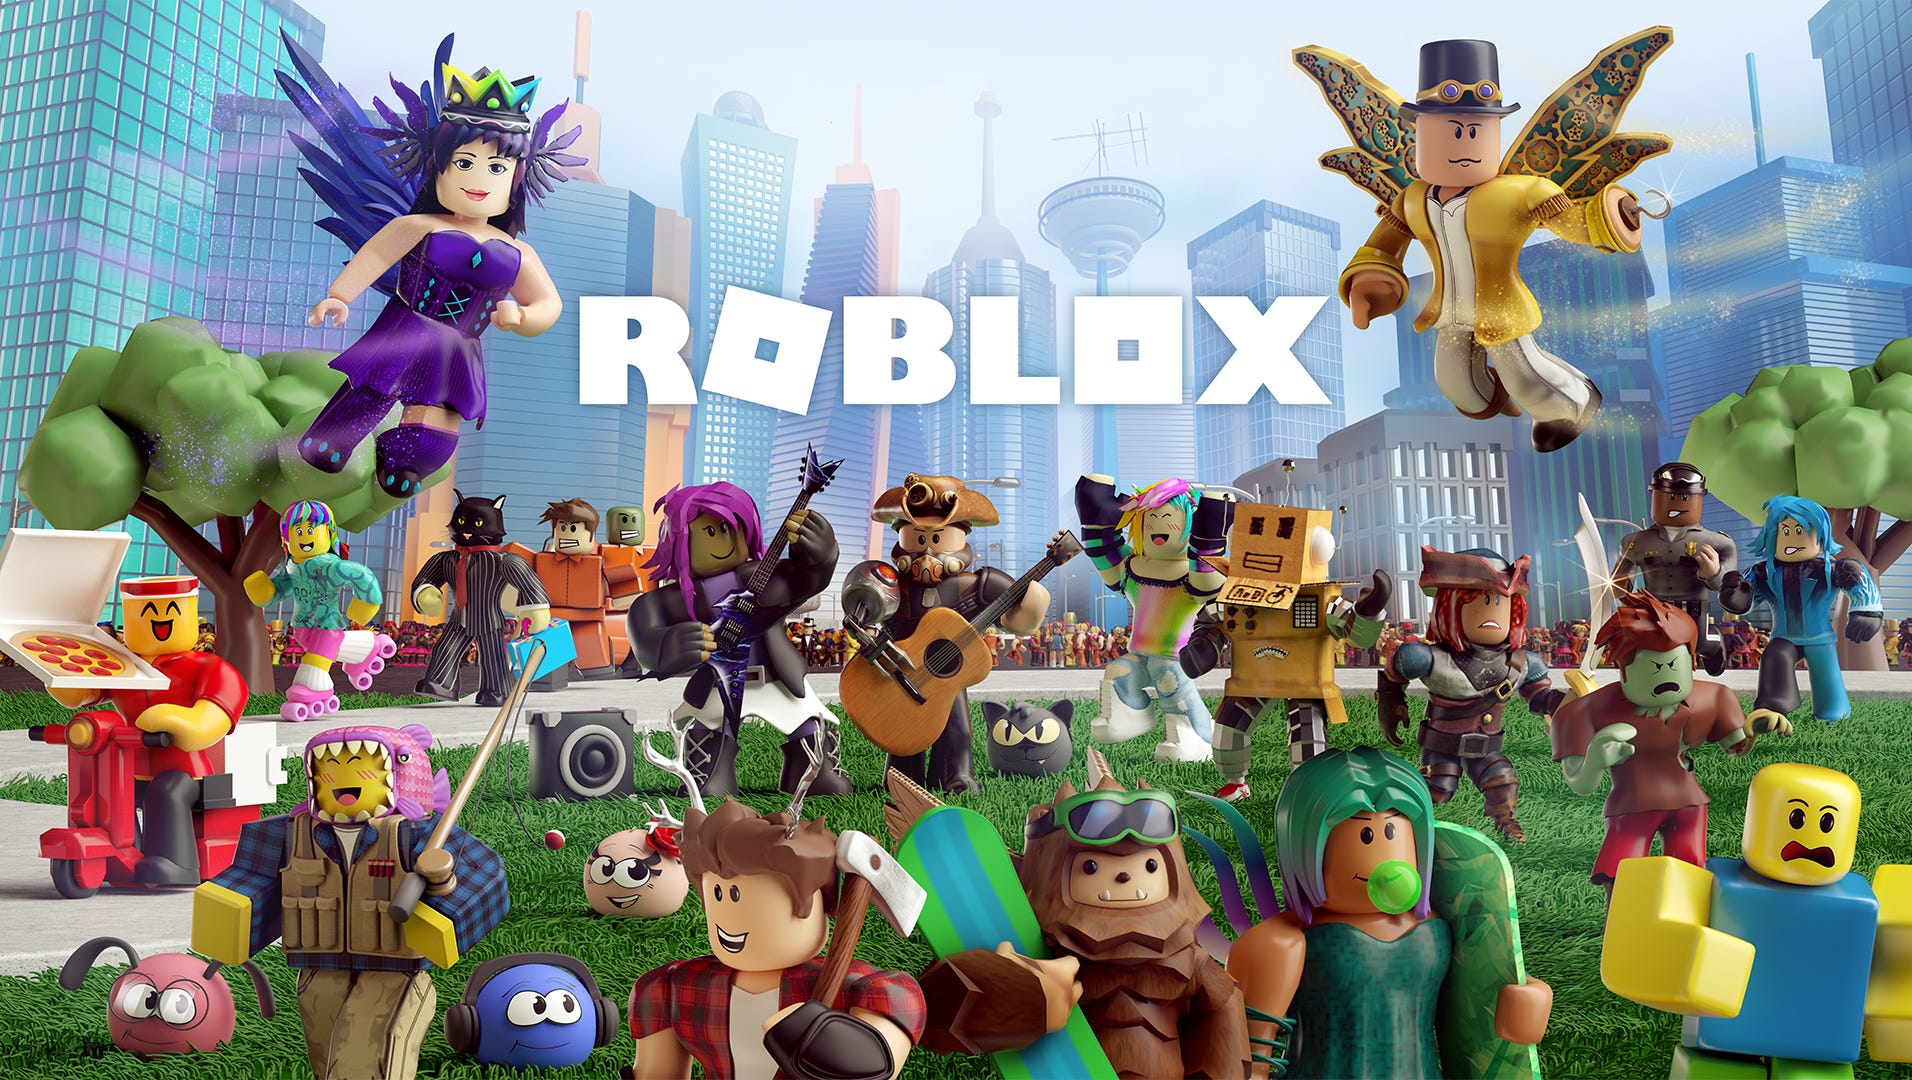 Roblox Kids Game Shows Character Being Sexually Violated Mom Warns - female roadblocks game roblox character